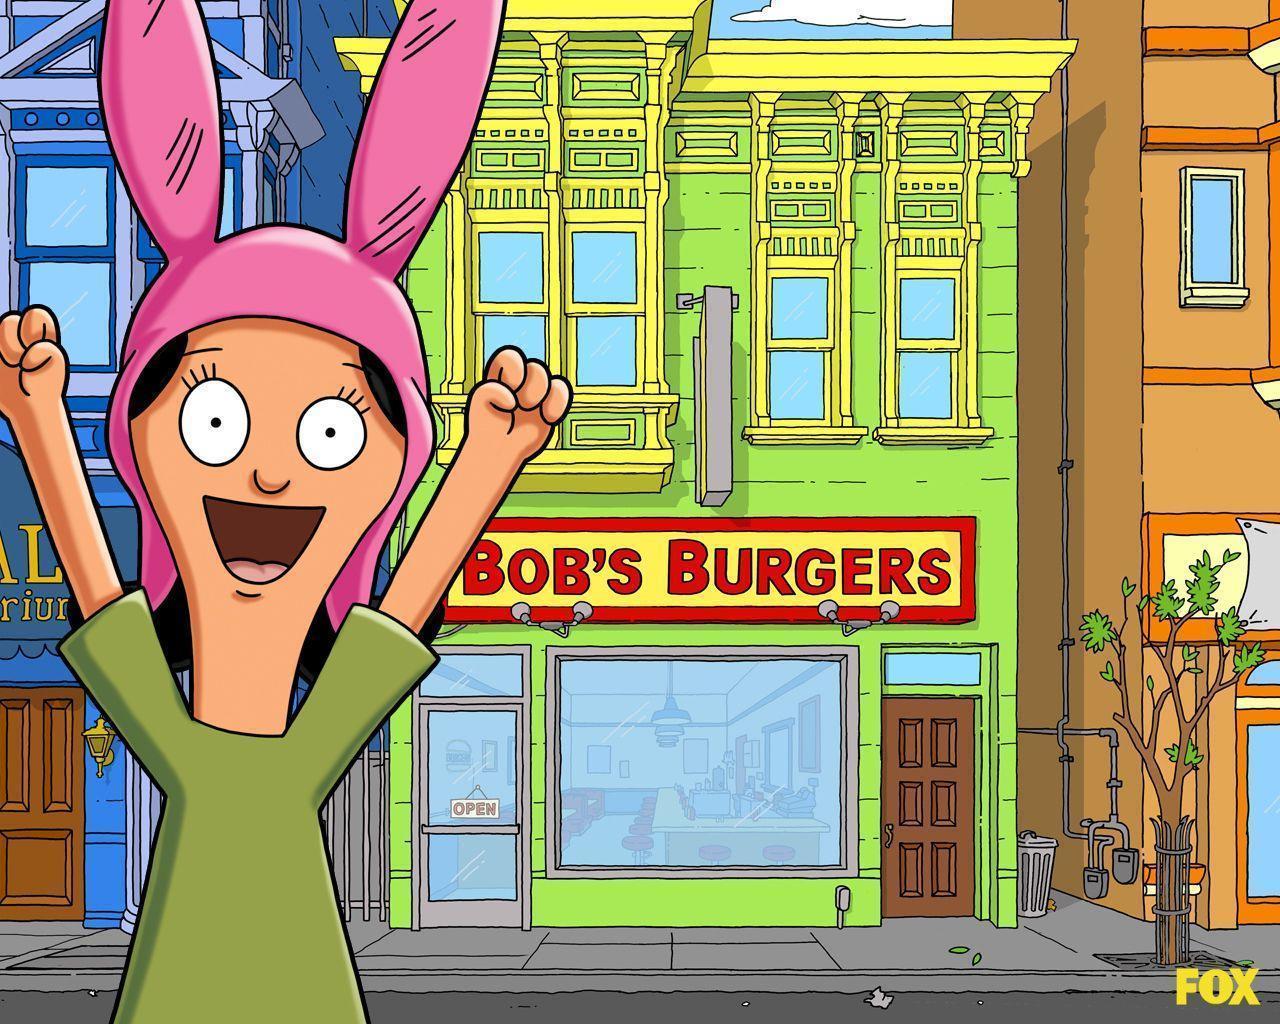 Louise Burgers. Bobs Burgers Awesomeness!